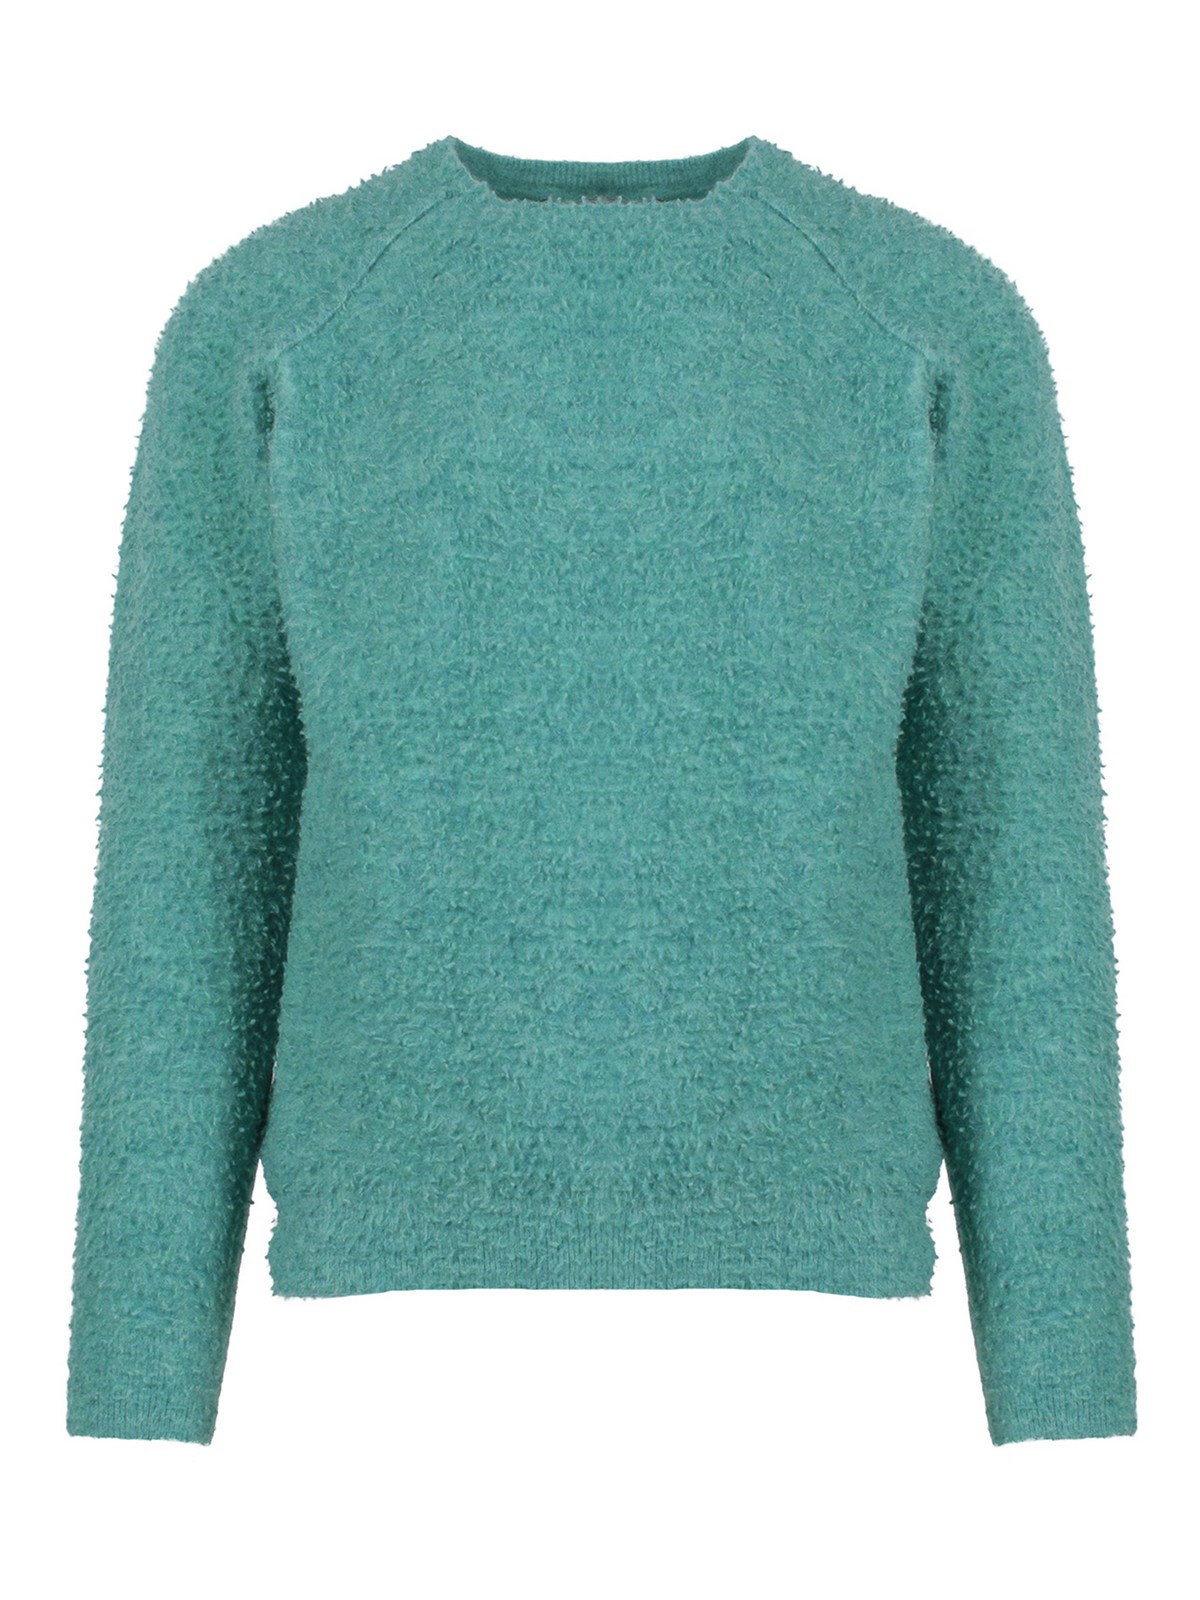 Original Vintage Style Sweater In Green